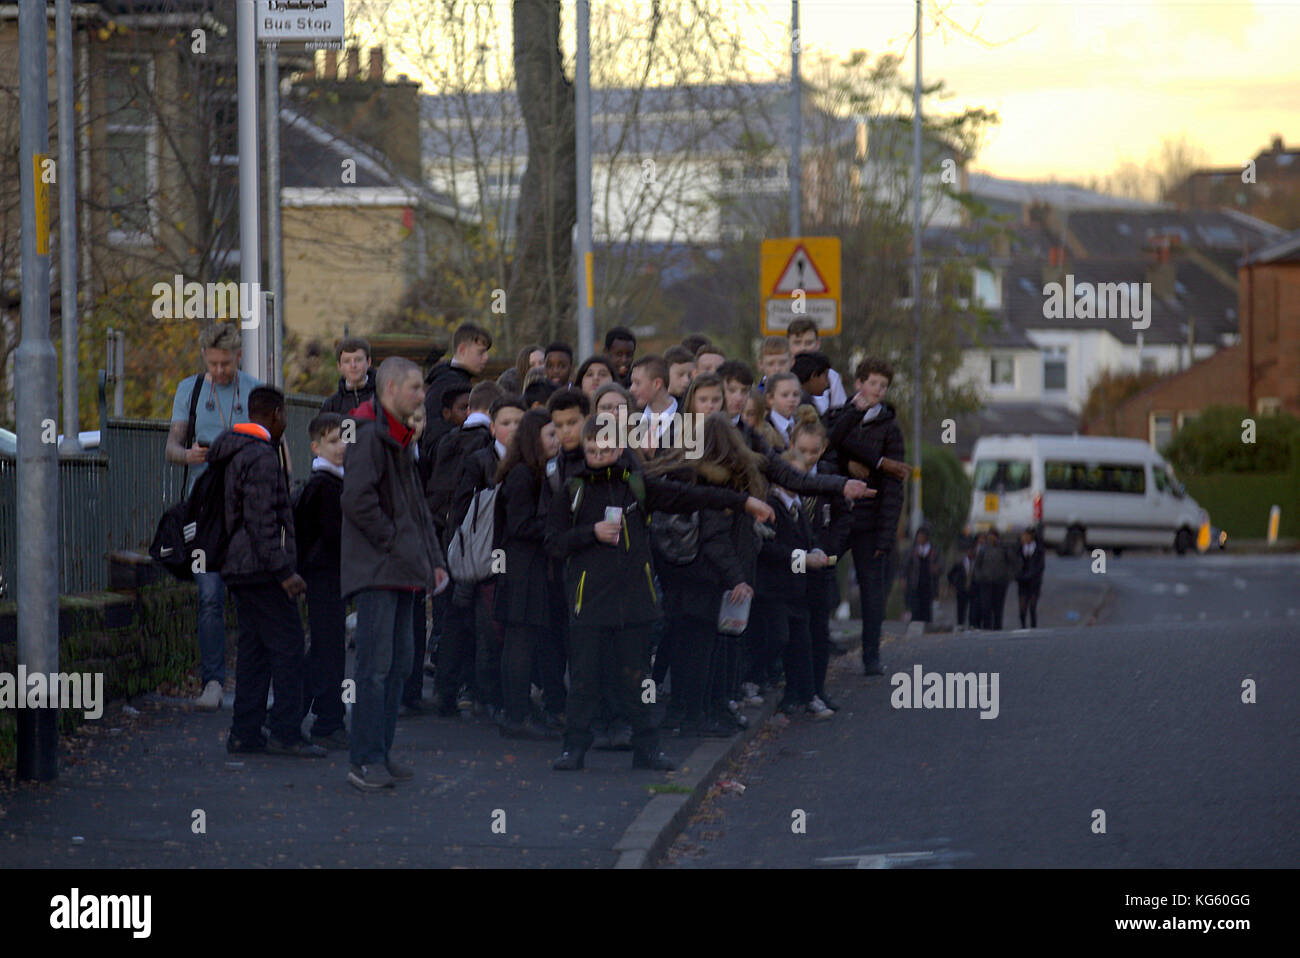 large group schoolchildren at bus stop signal request to board  street Jordanhill news image Stock Photo